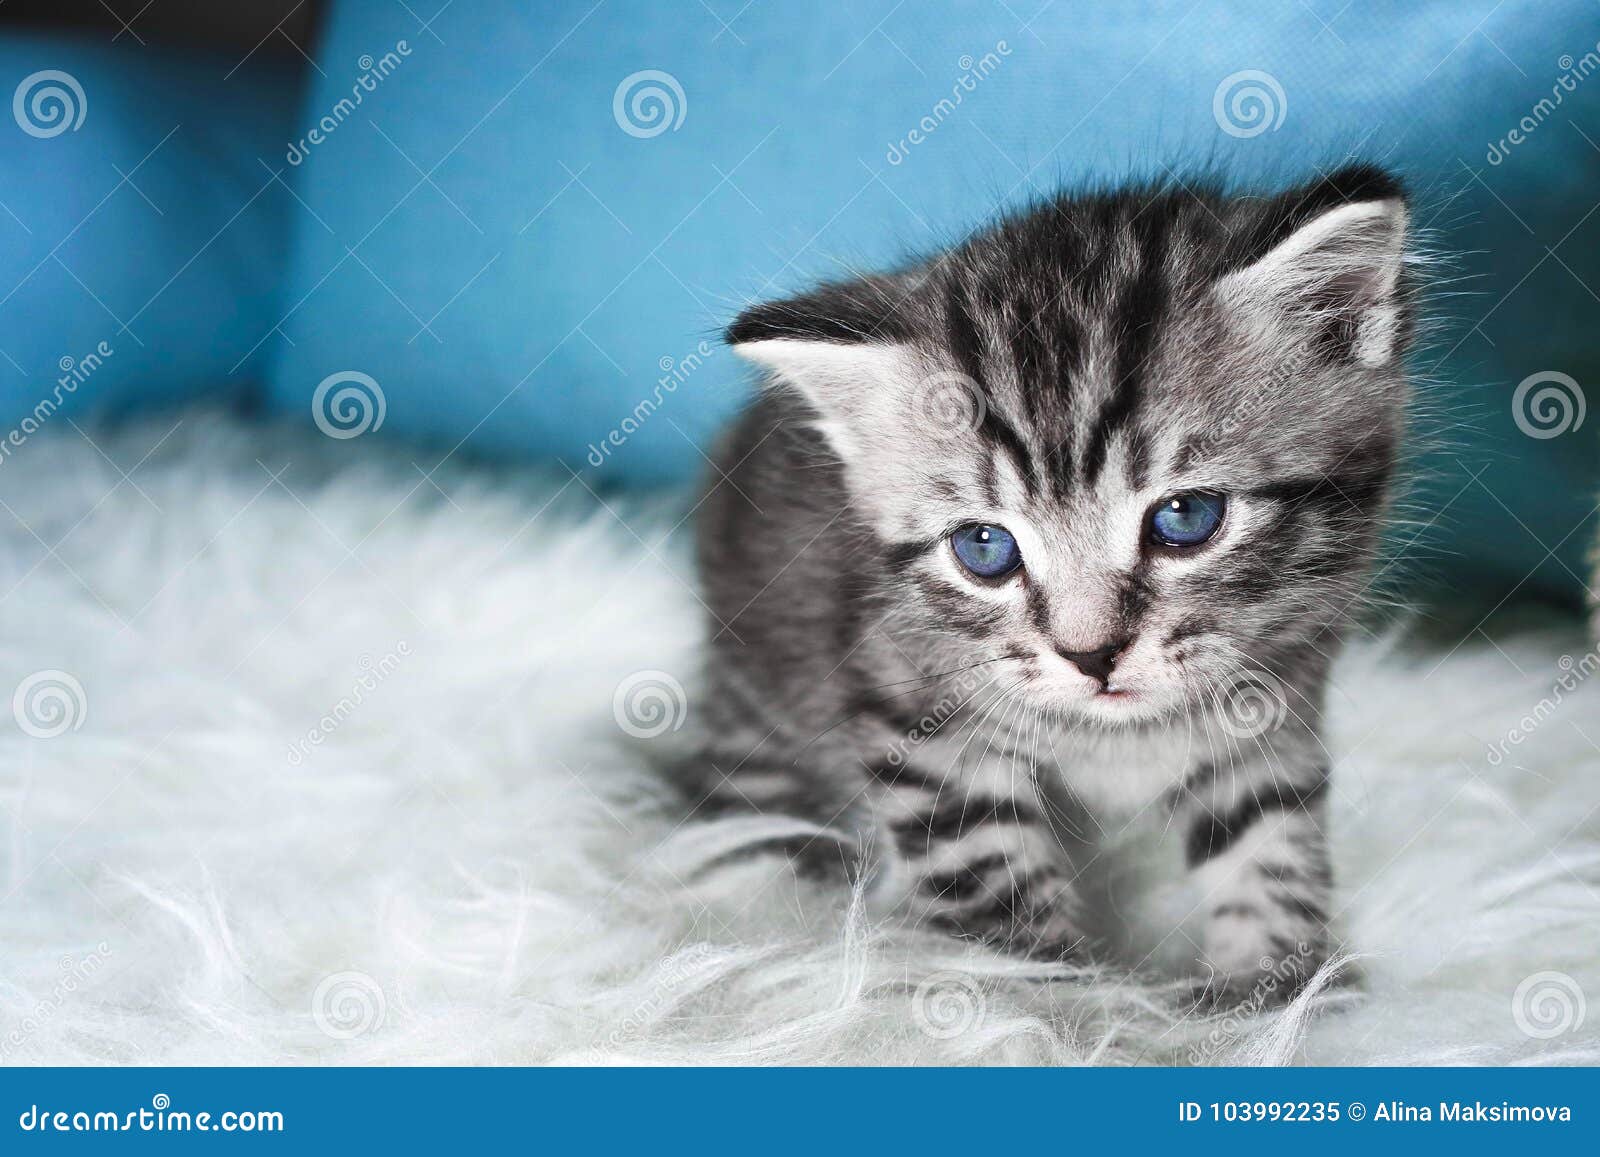 Sad Kitten. Kitten Is Tired And Sick Stock Image Image of breed